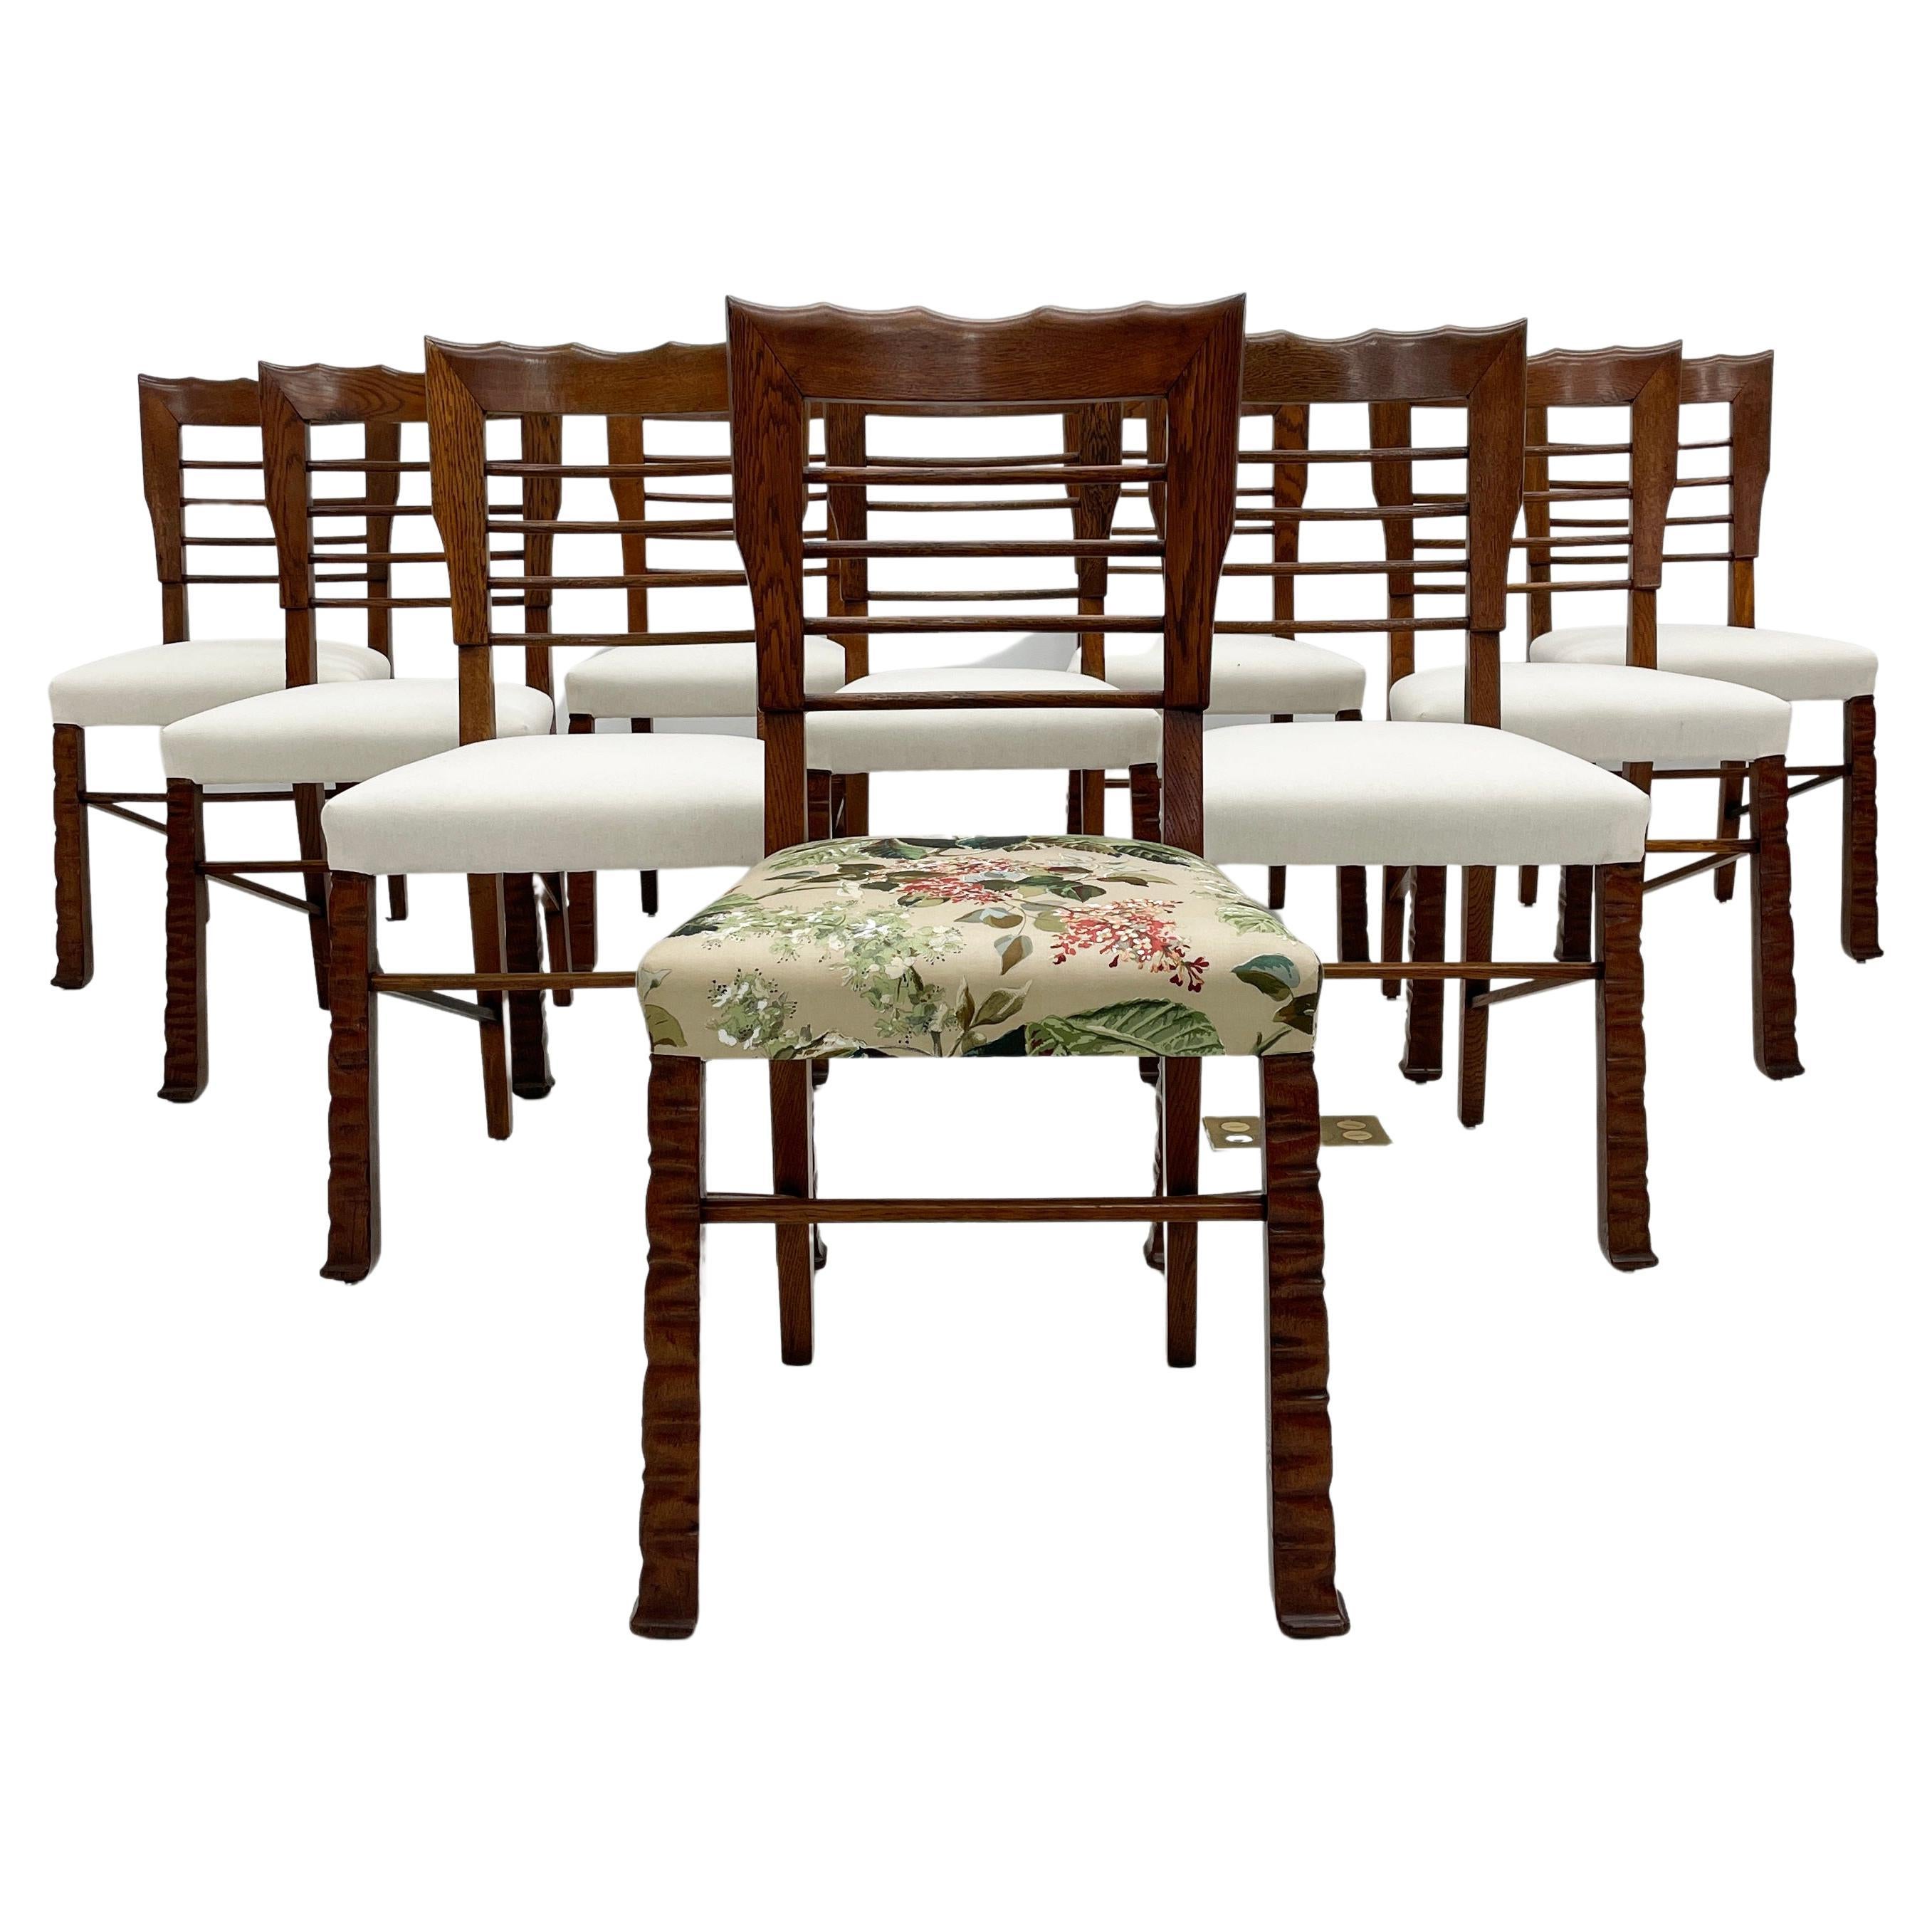 Rustic Scalloped Edge Dining Chairs, Set of 10, Italy, 1940's